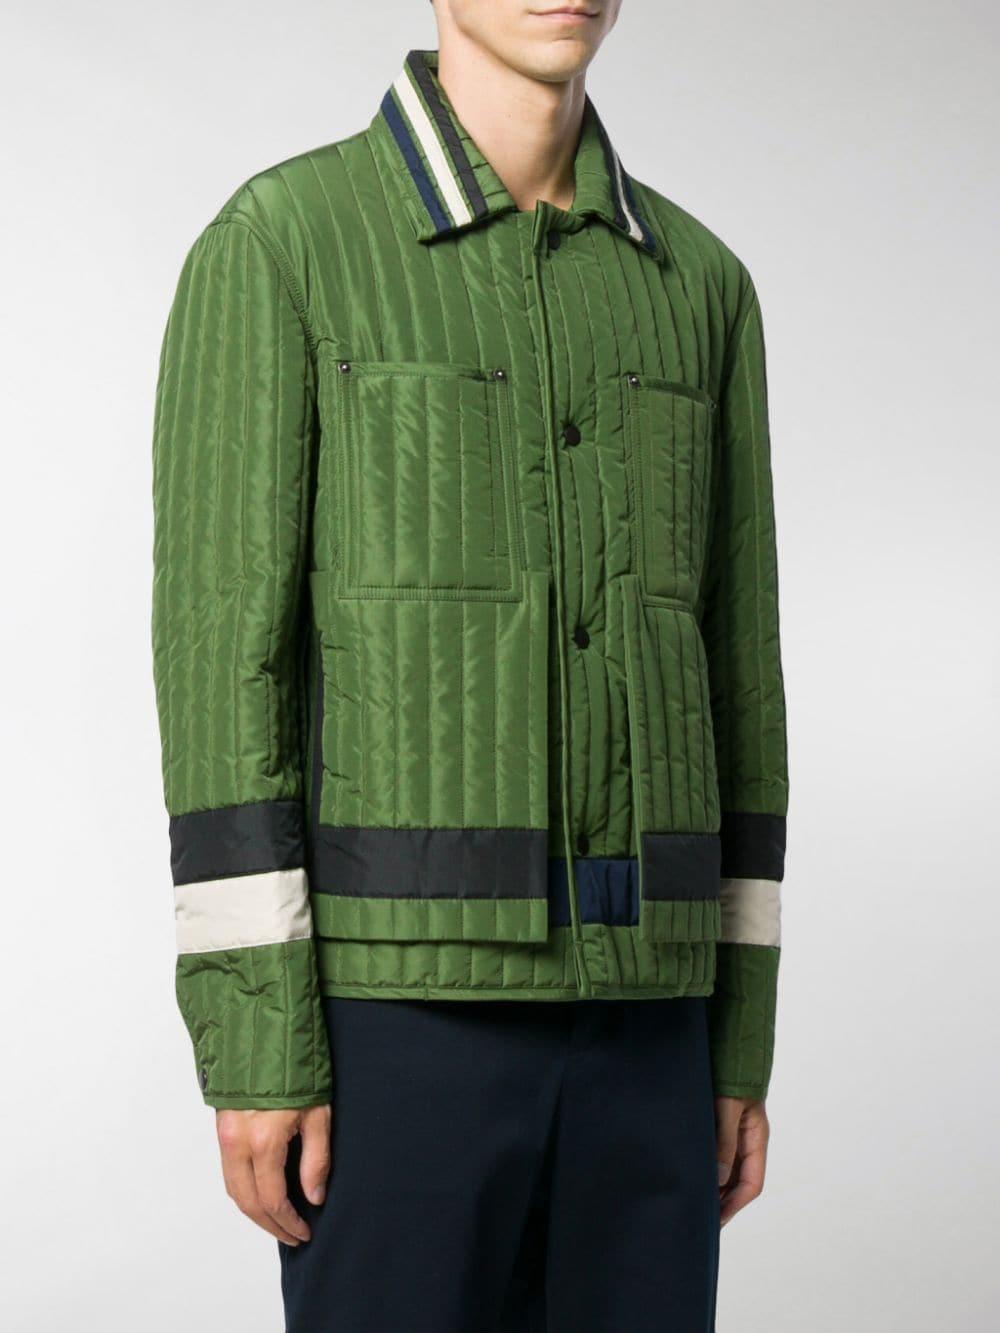 Craig Green Quilted Jacket in Green for Men - Lyst